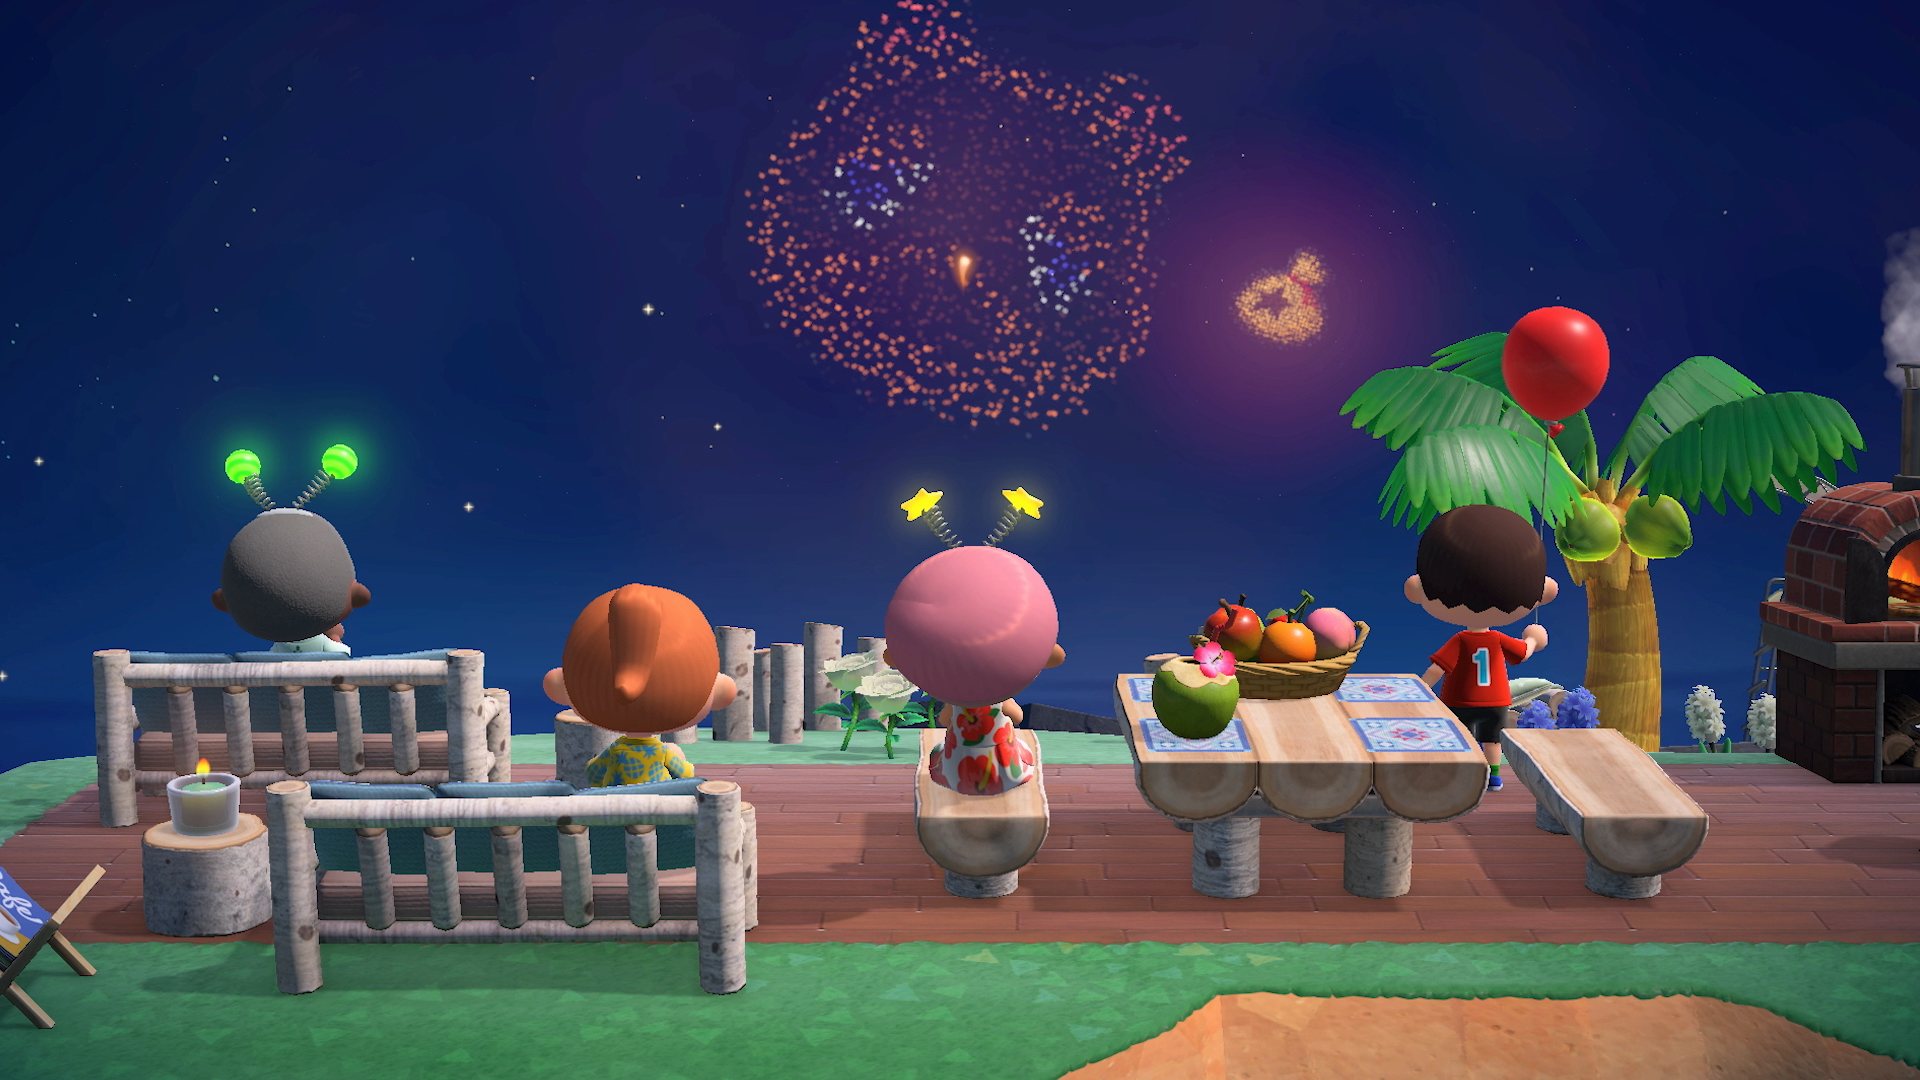 Switch_ACNH_SummerUpdate-02-2020_screen_01 This Week's Nintendo Downloads: Have a Blast With Fireworks and Dreams in Animal Crossing: New Horizons